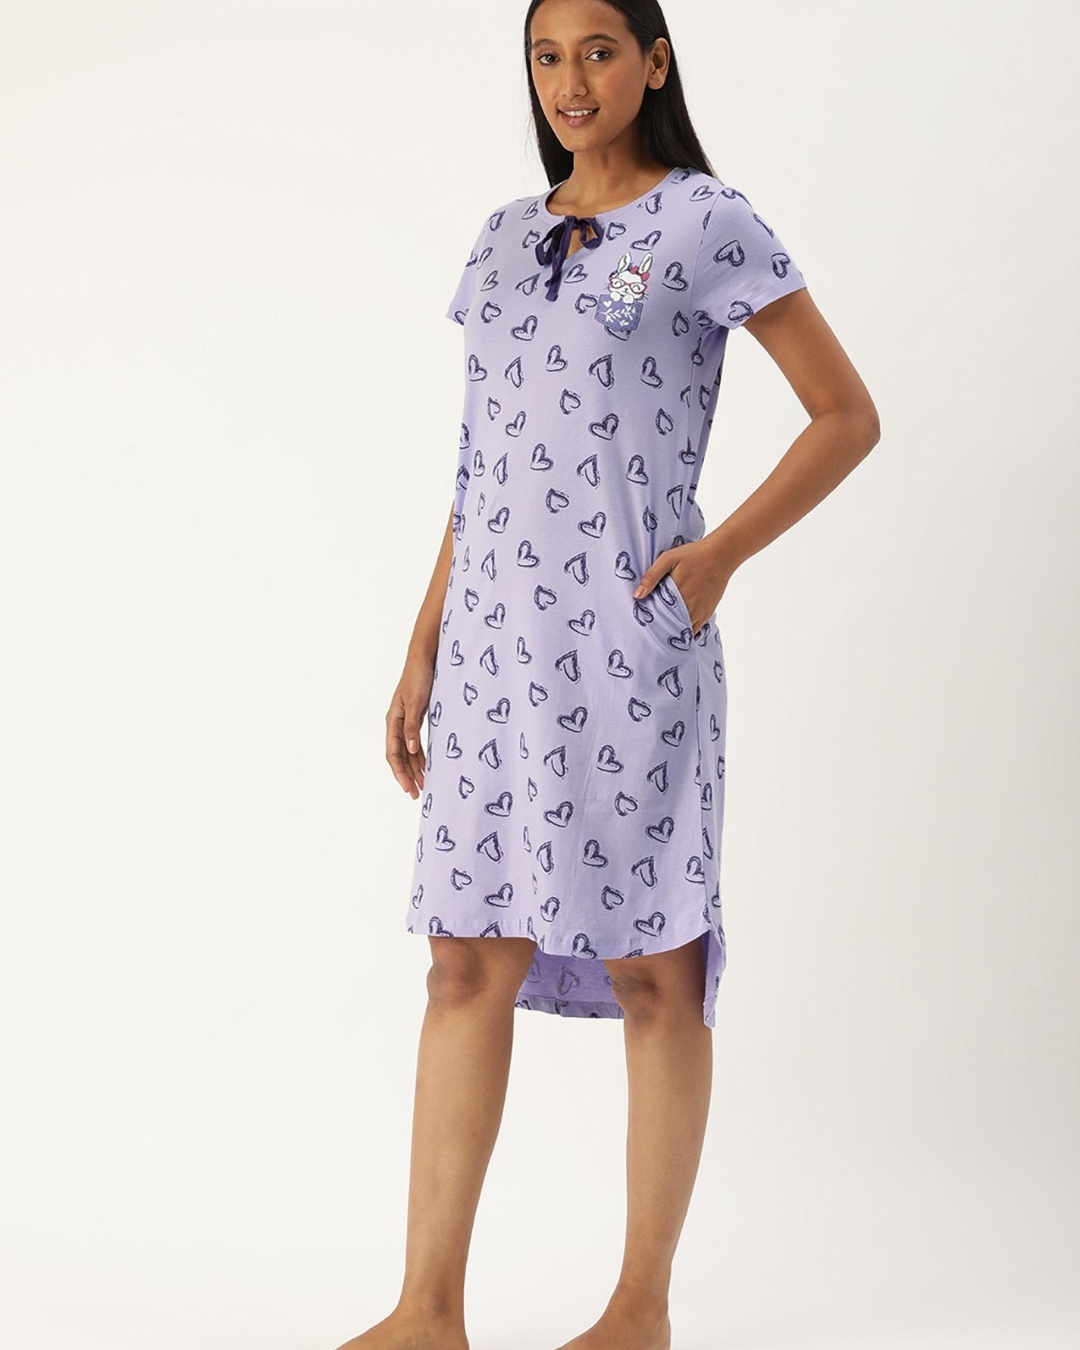 Shop Women's Blue All Over Printed Short Nighty-Design